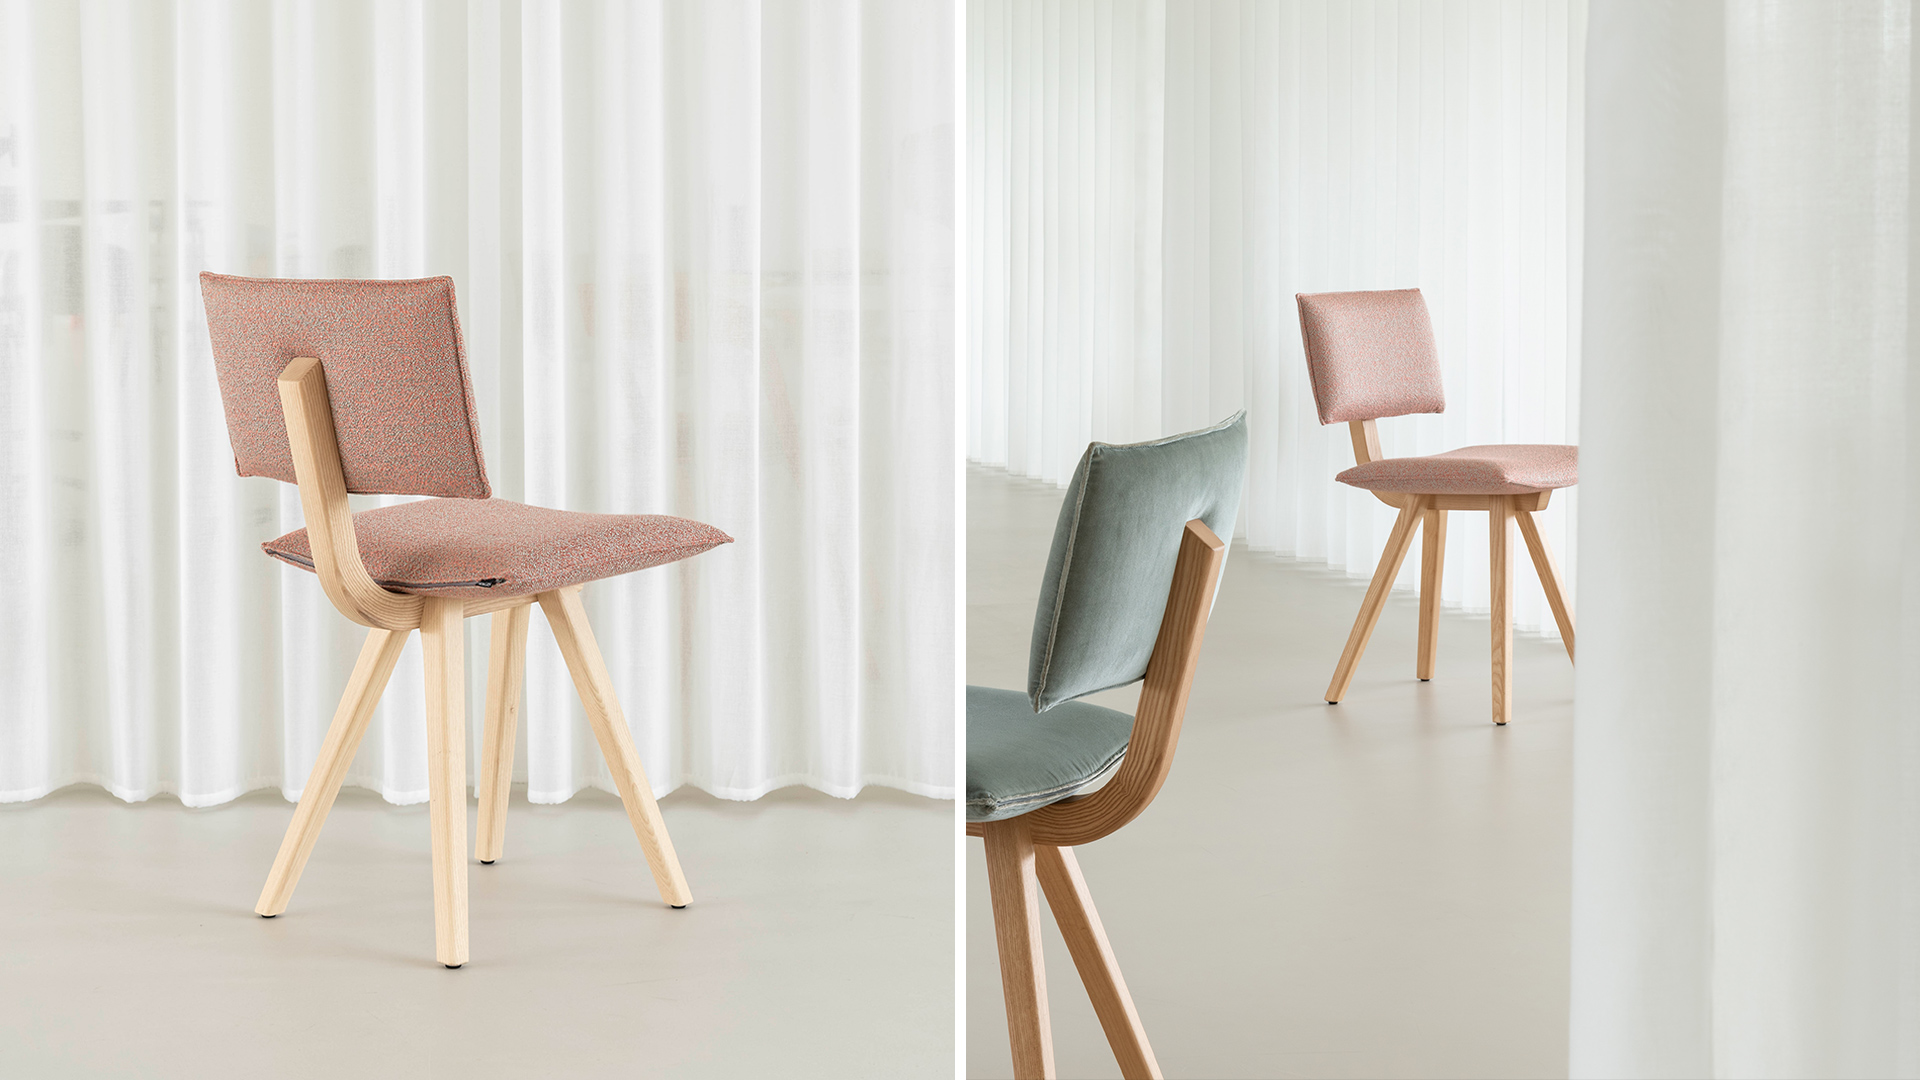 Trave Chair, Lifestyle